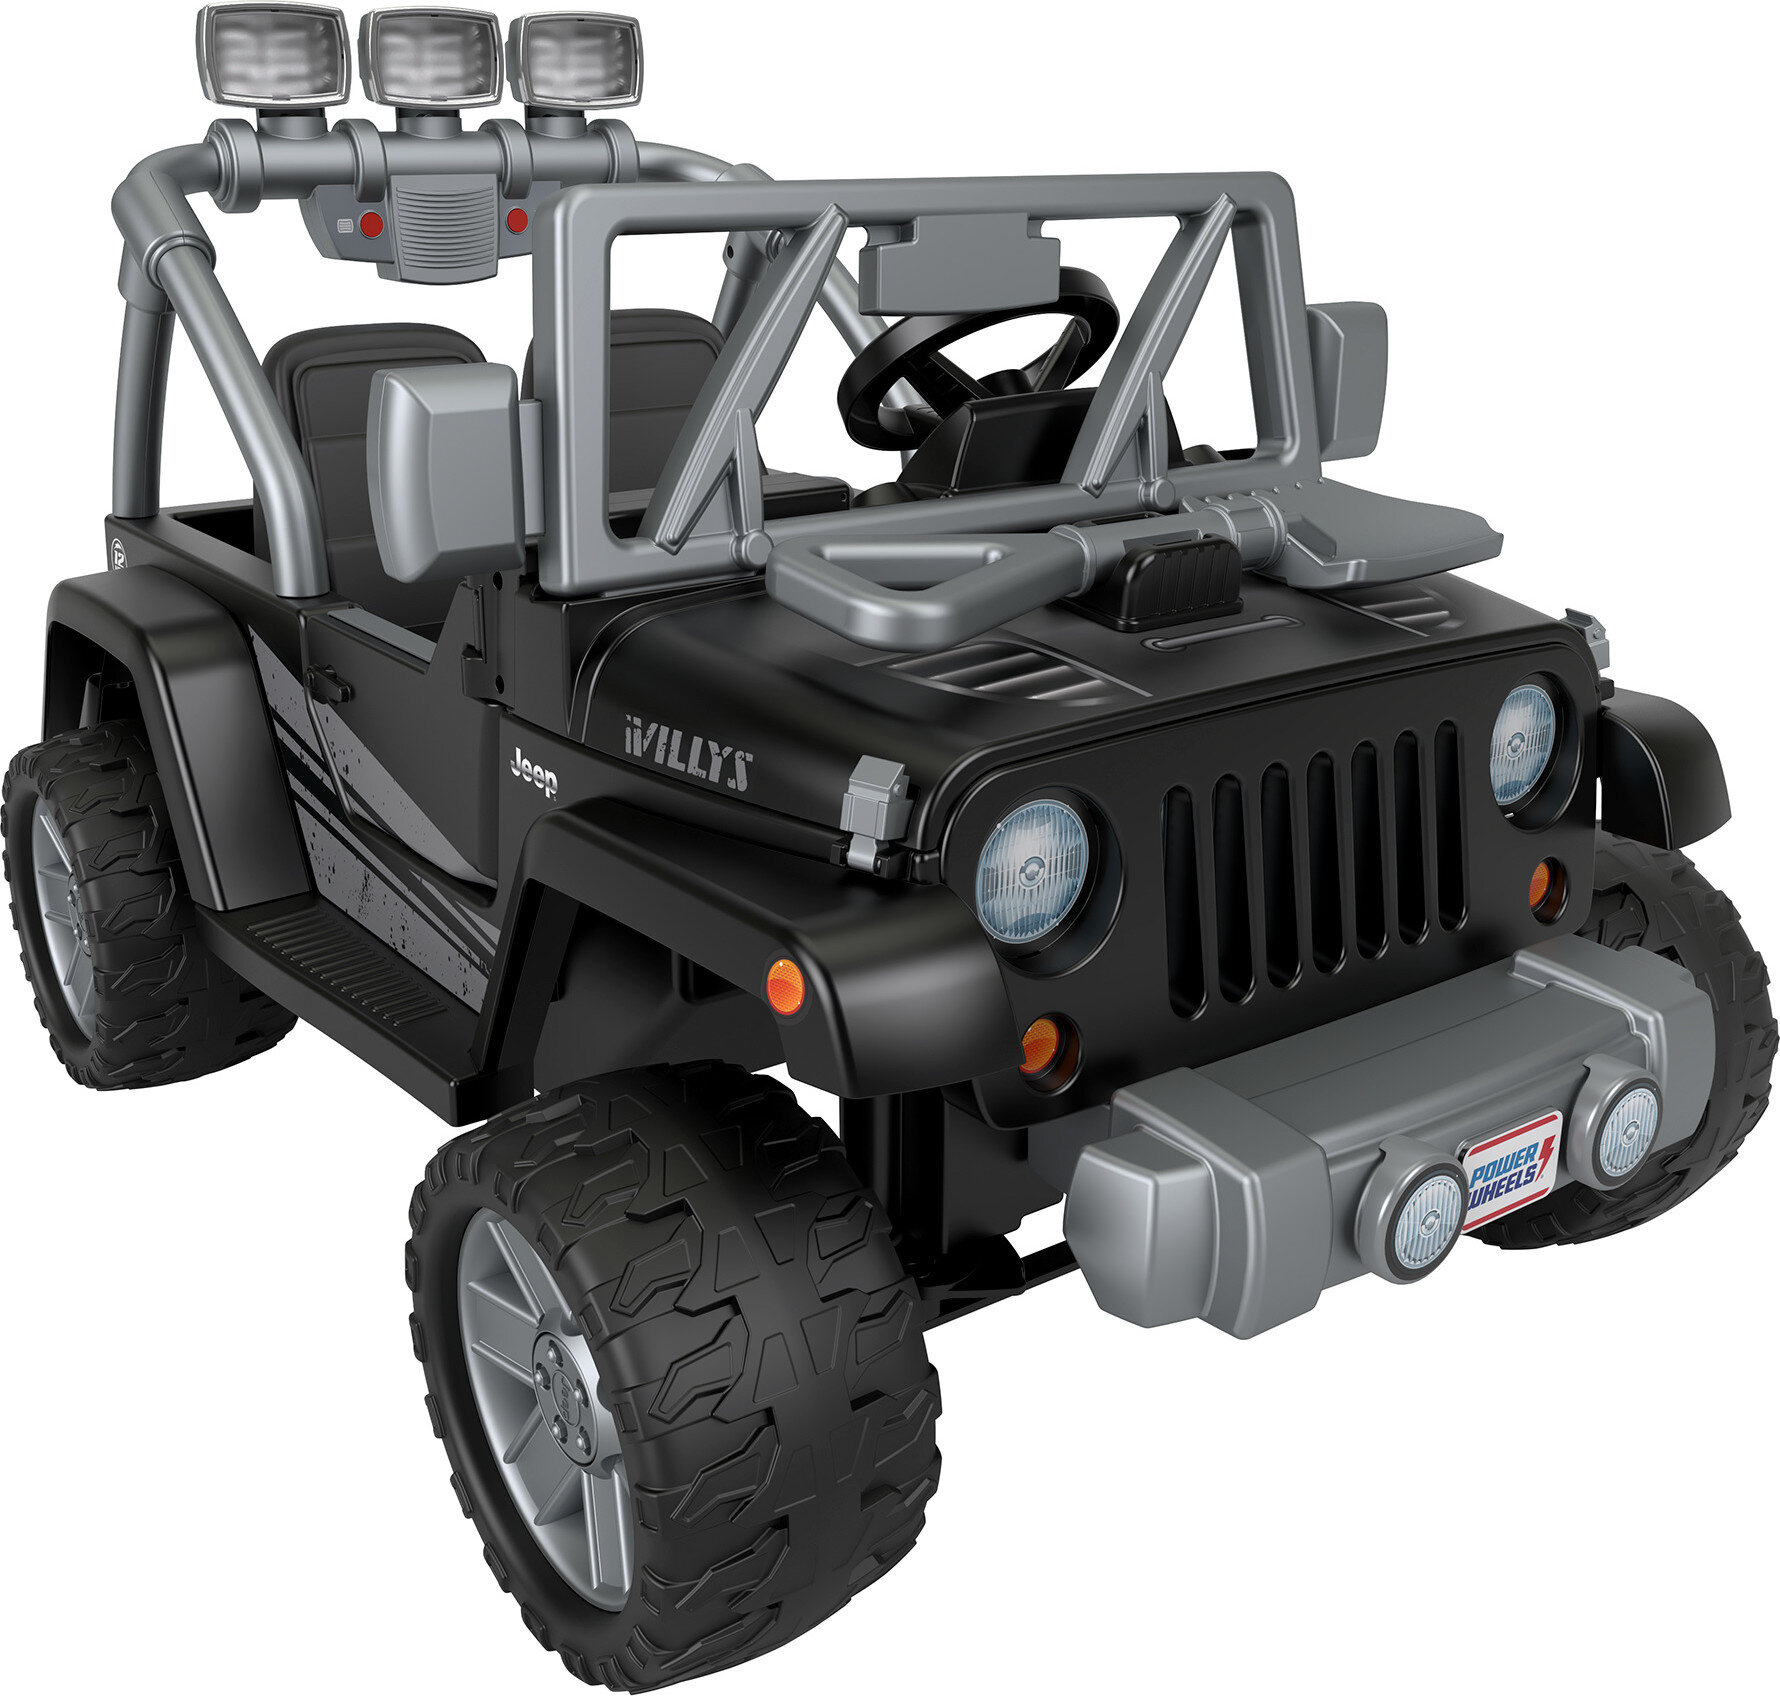 Power Wheels Jeep Wrangler Willys Battery-Powered Ride-on, 12 V, Max Speed: 5 mph - image 1 of 7